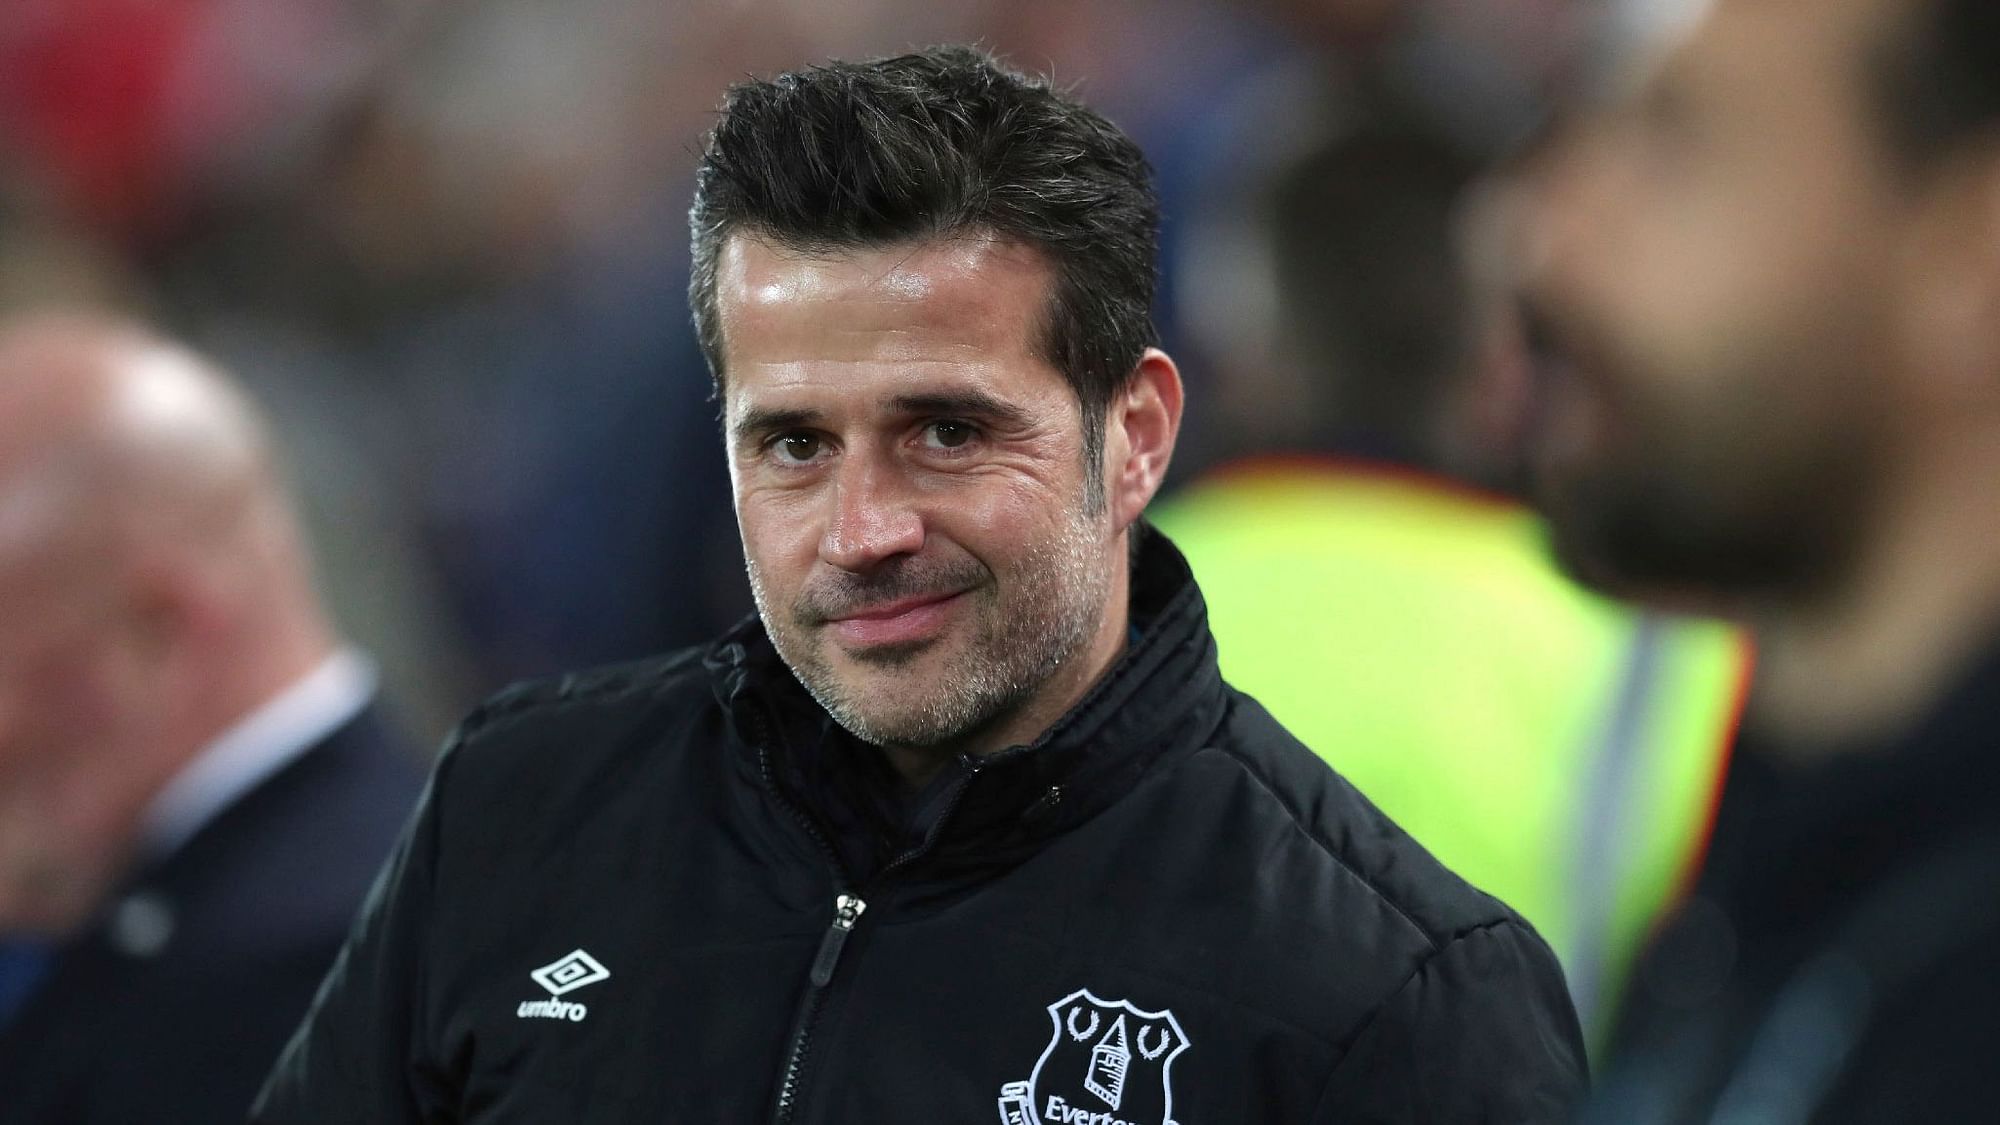 Everton’s manager Marco Silva is seen before the English Premier League match between Liverpool and Everton at Anfield Stadium, Liverpool, England.